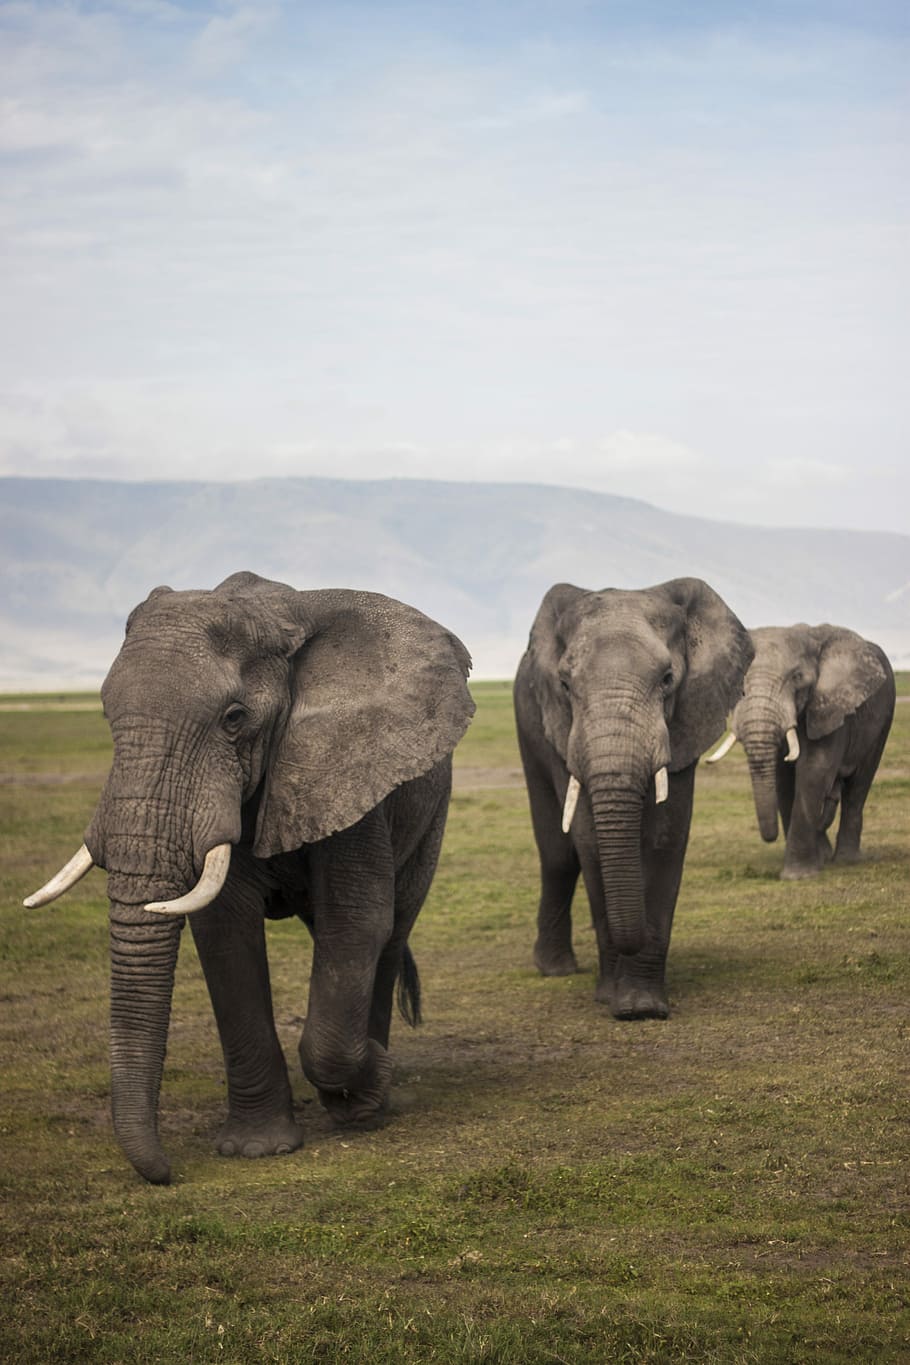 three elephants walking on grass field during day, three gray elephants walking on green grass field during daytime